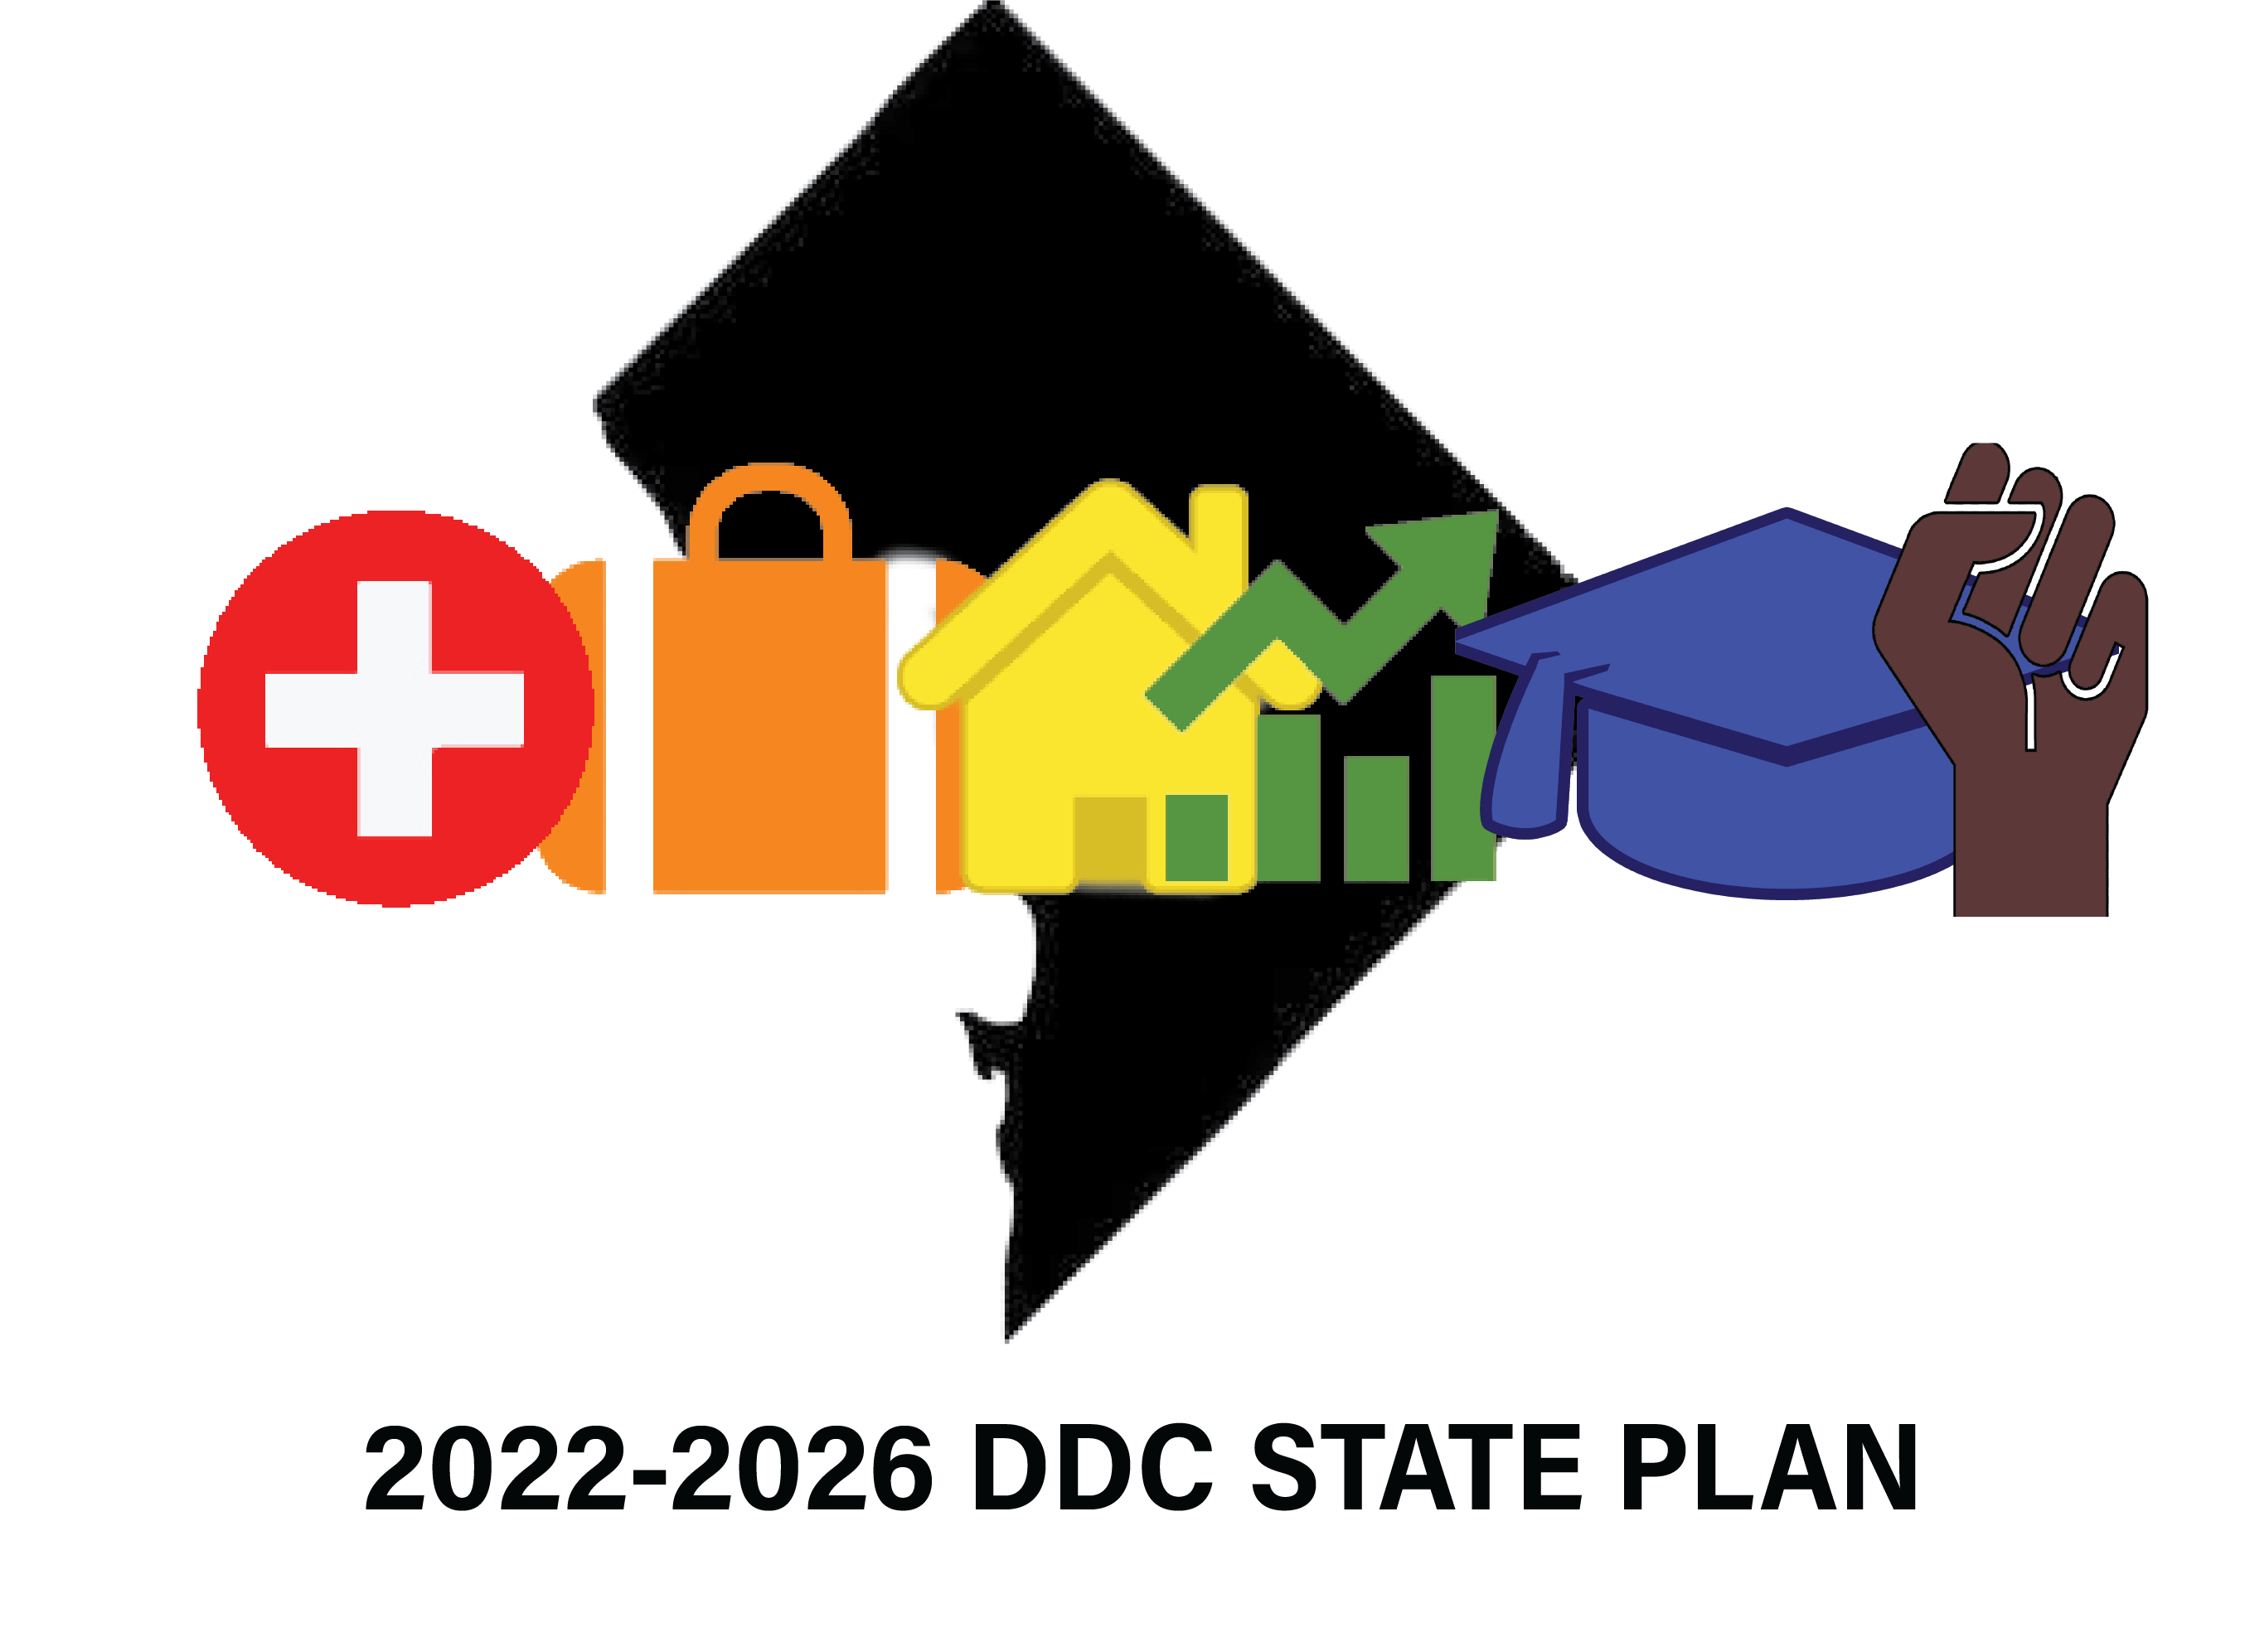 The DC State 2022-2016 State Plan Logo: A black outline of DC with a red circle with the white cross (Health), a orange suitcase (Employment), a yellow house (Housing), a green area with bars (Quality), a blue graduation cap (Education), and a brown fist pumping (Diversity). Below is text: 2022-2026 DDC STATE PLAN.